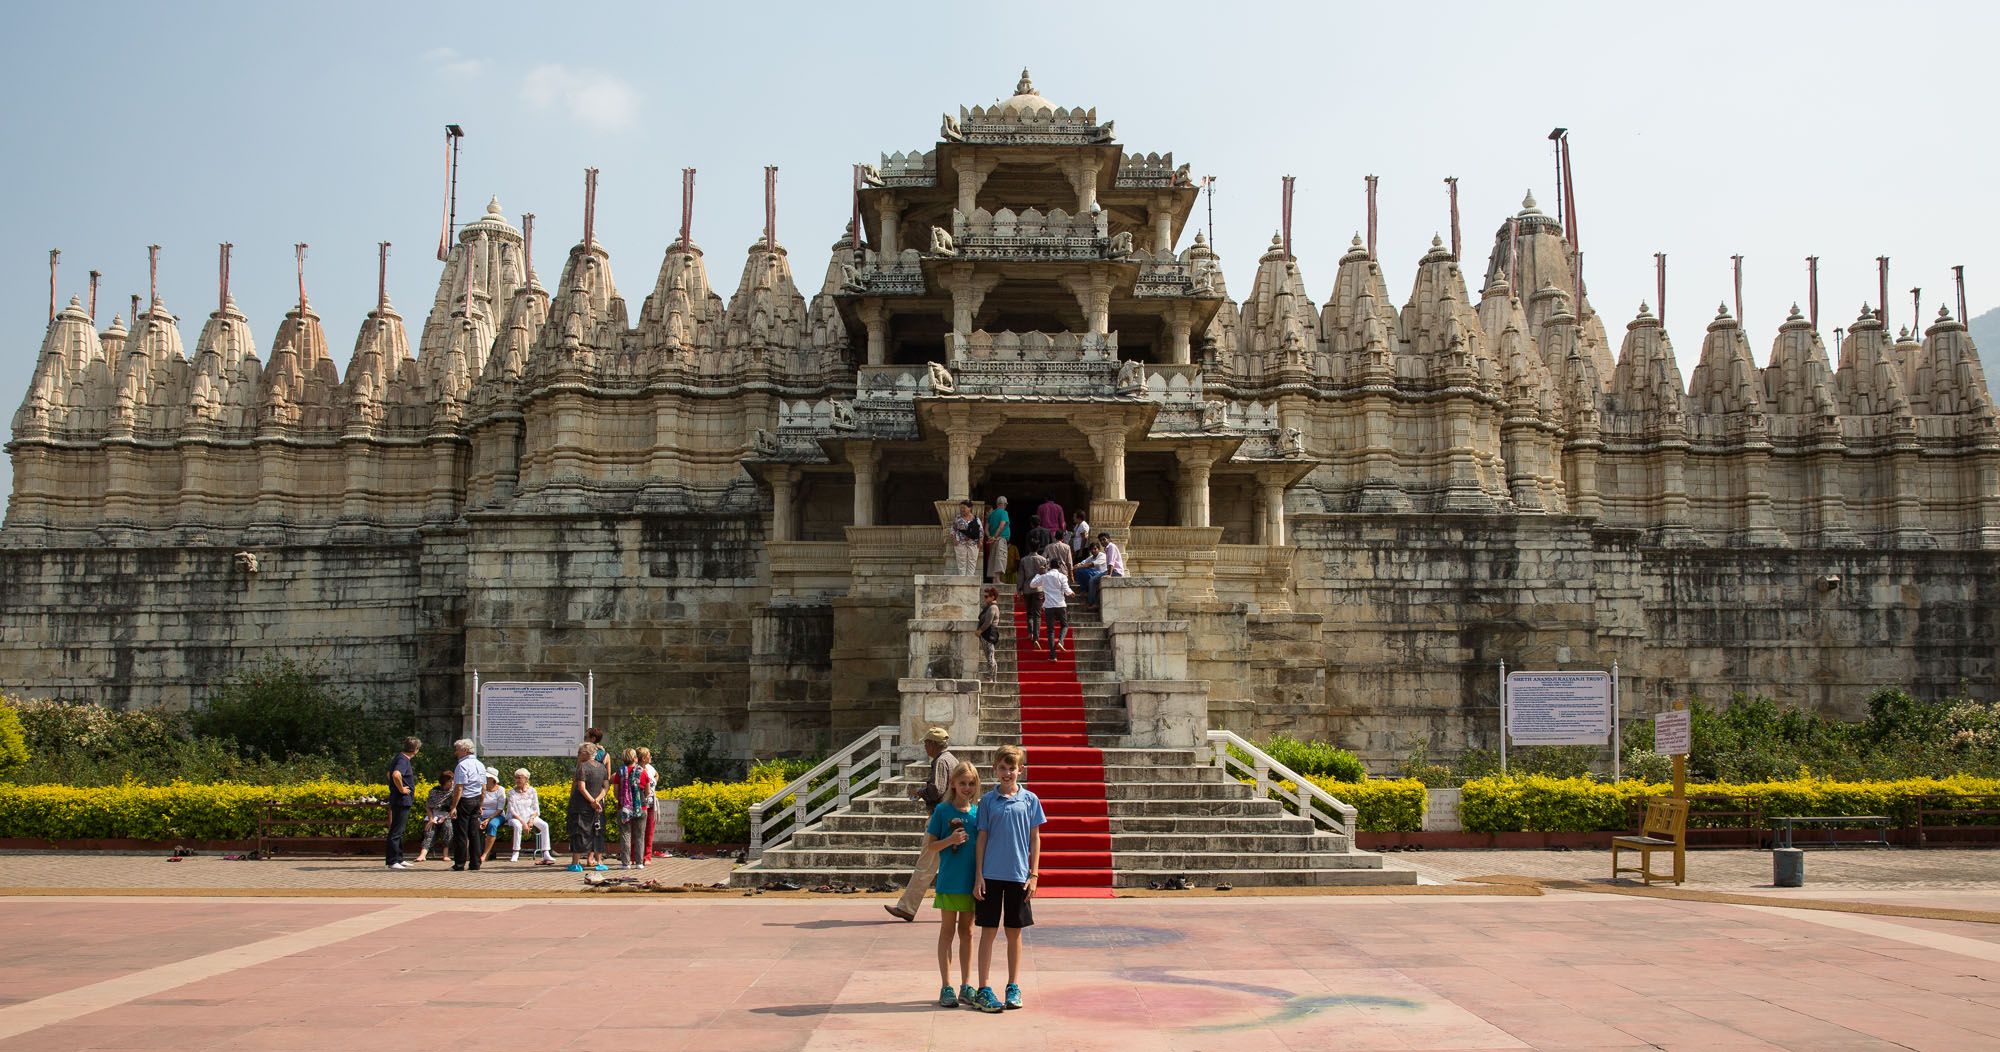 Featured image for “How to Visit Ranakpur Temple on a Road Trip through India”